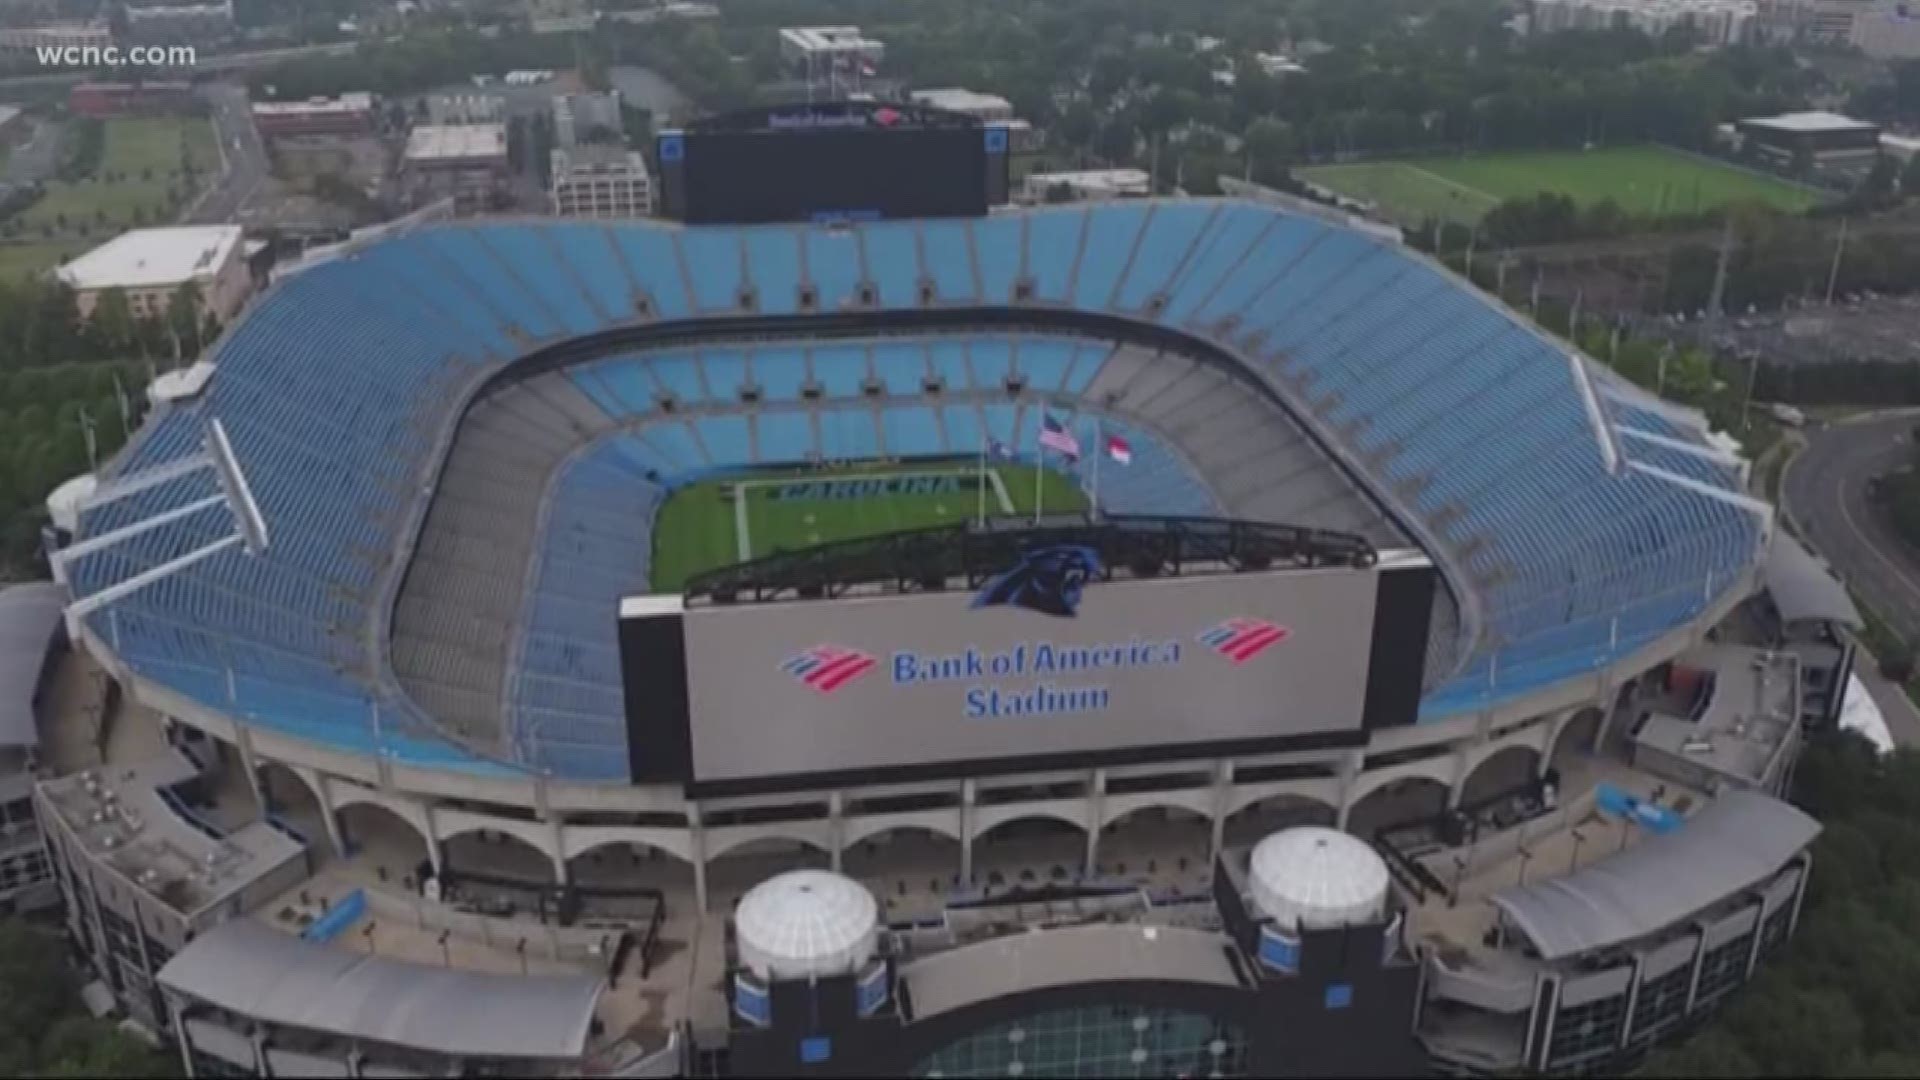 David Tepper has said that he would like to see a domed stadium that would allow for ACC basketball, and concerts.